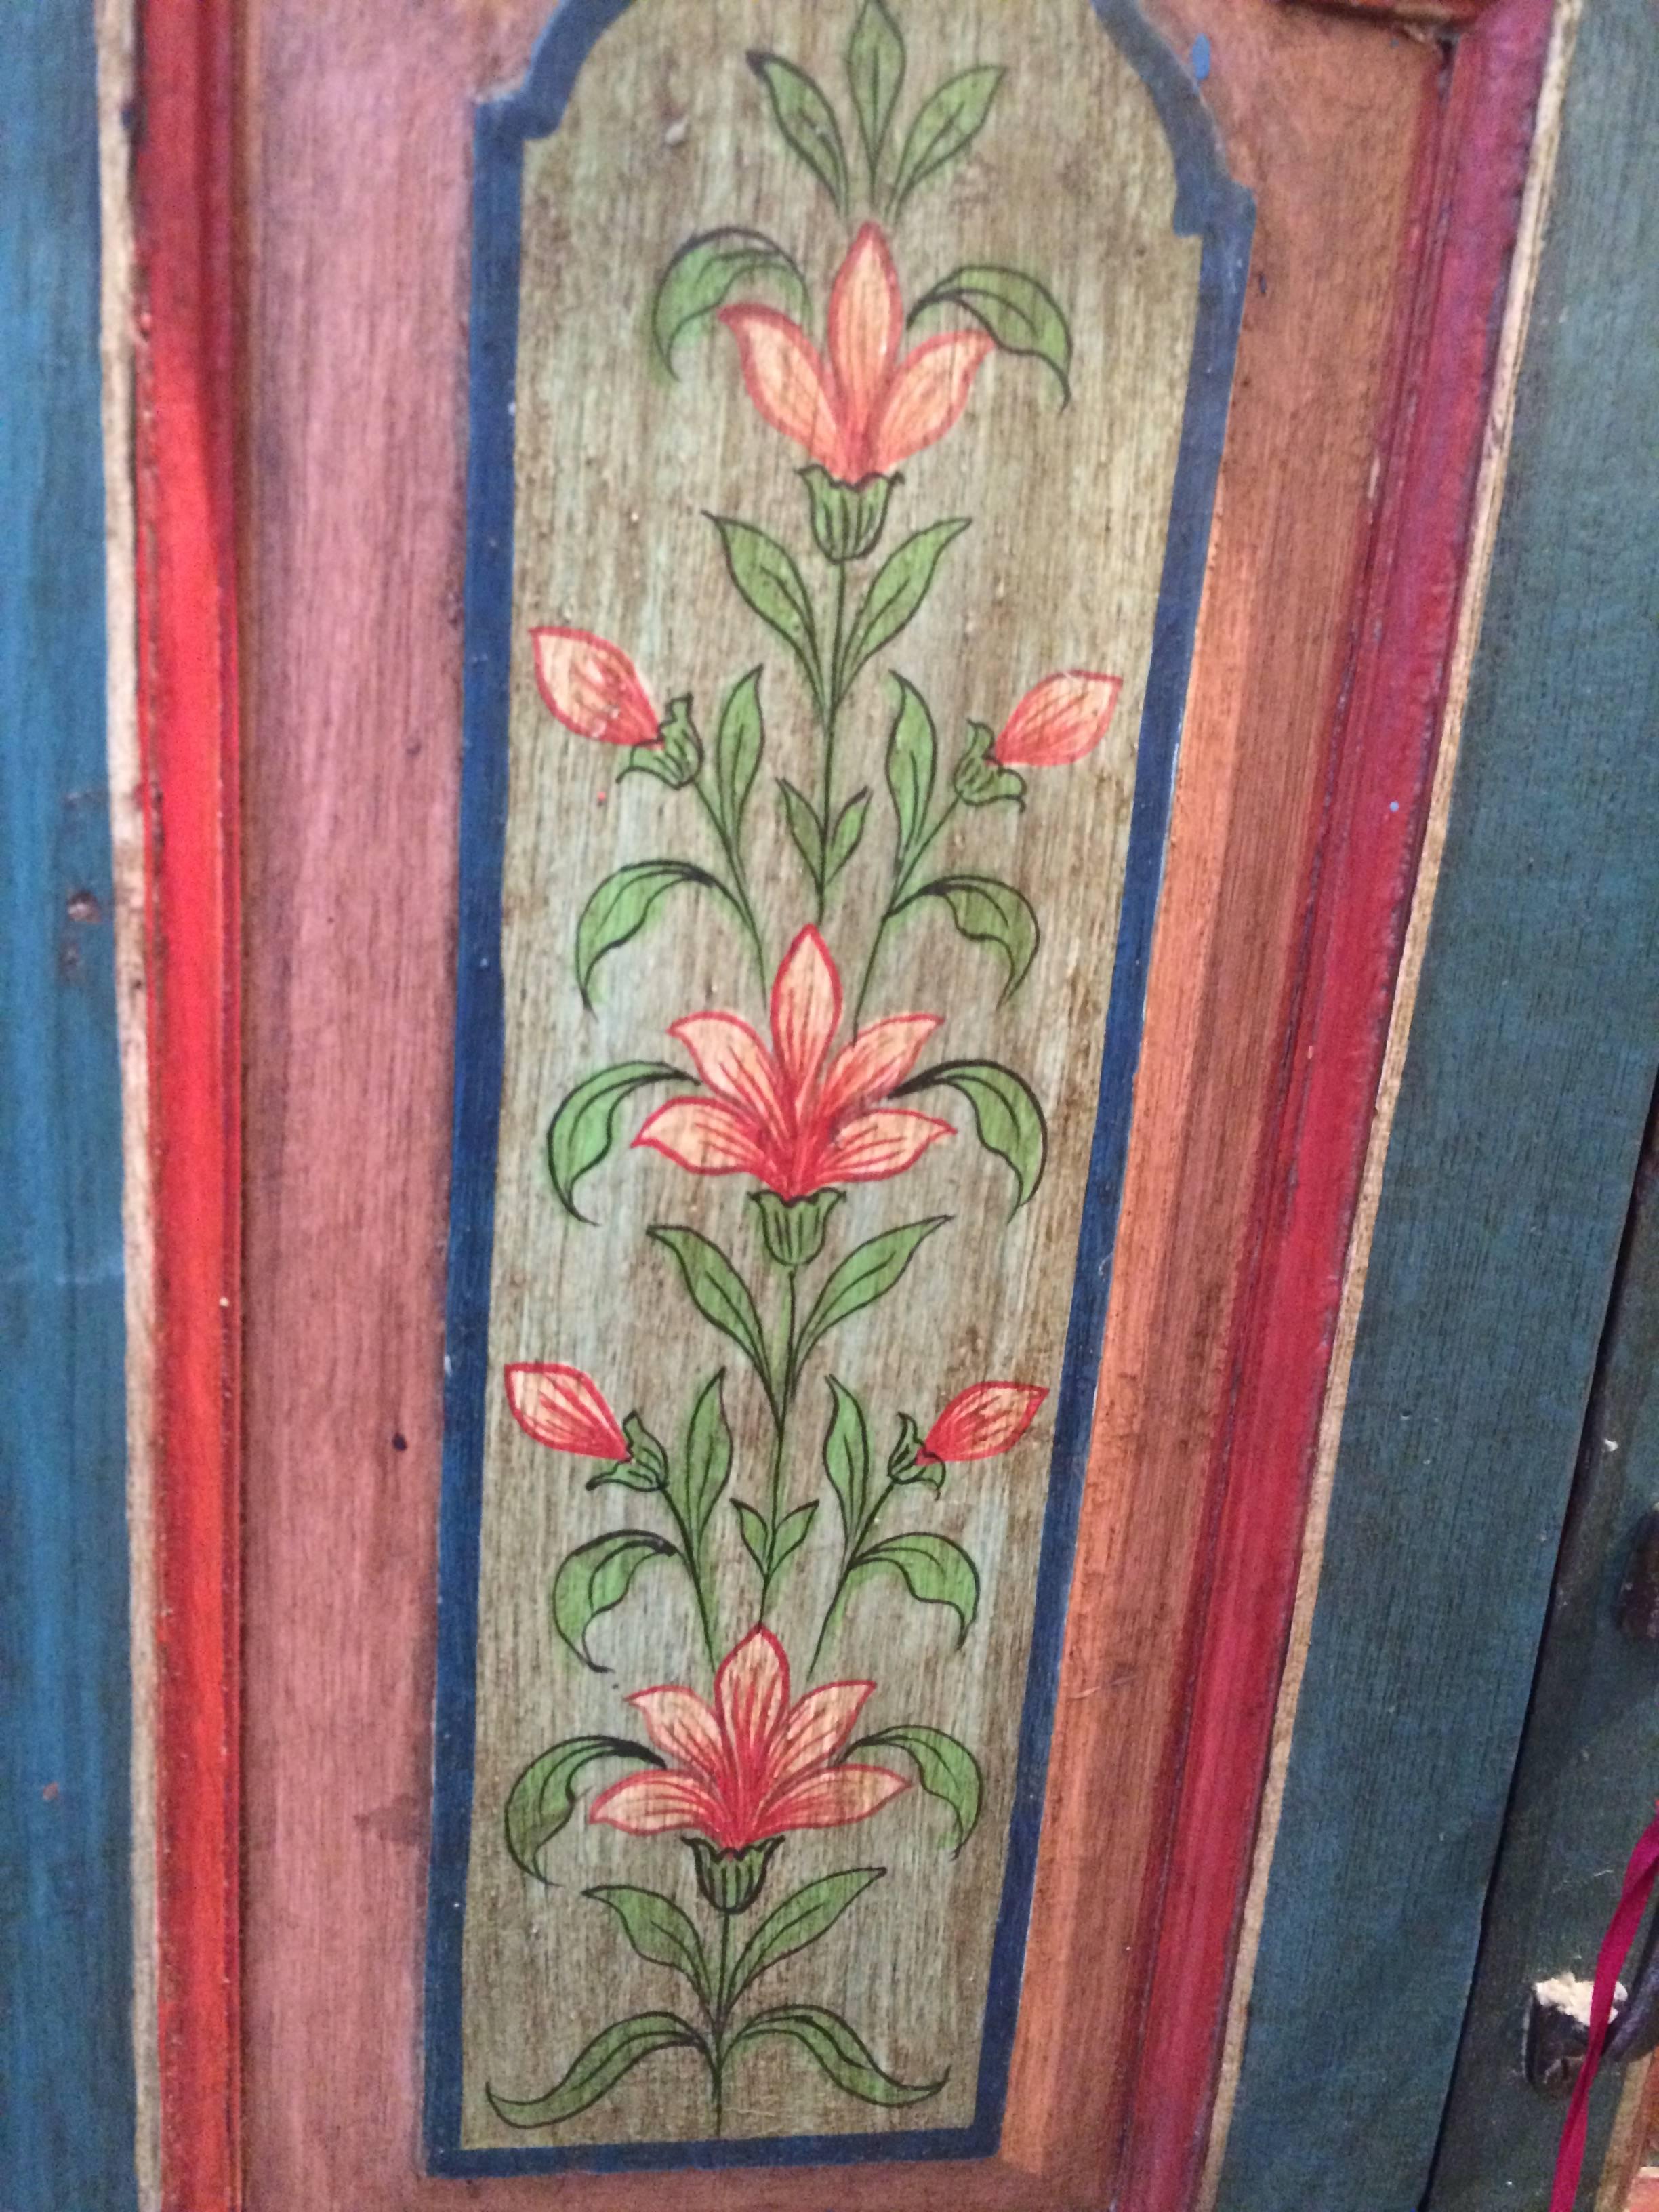 Lovely Early 1900s Hand-Painted Window Shutters Converted to Cabinet 1